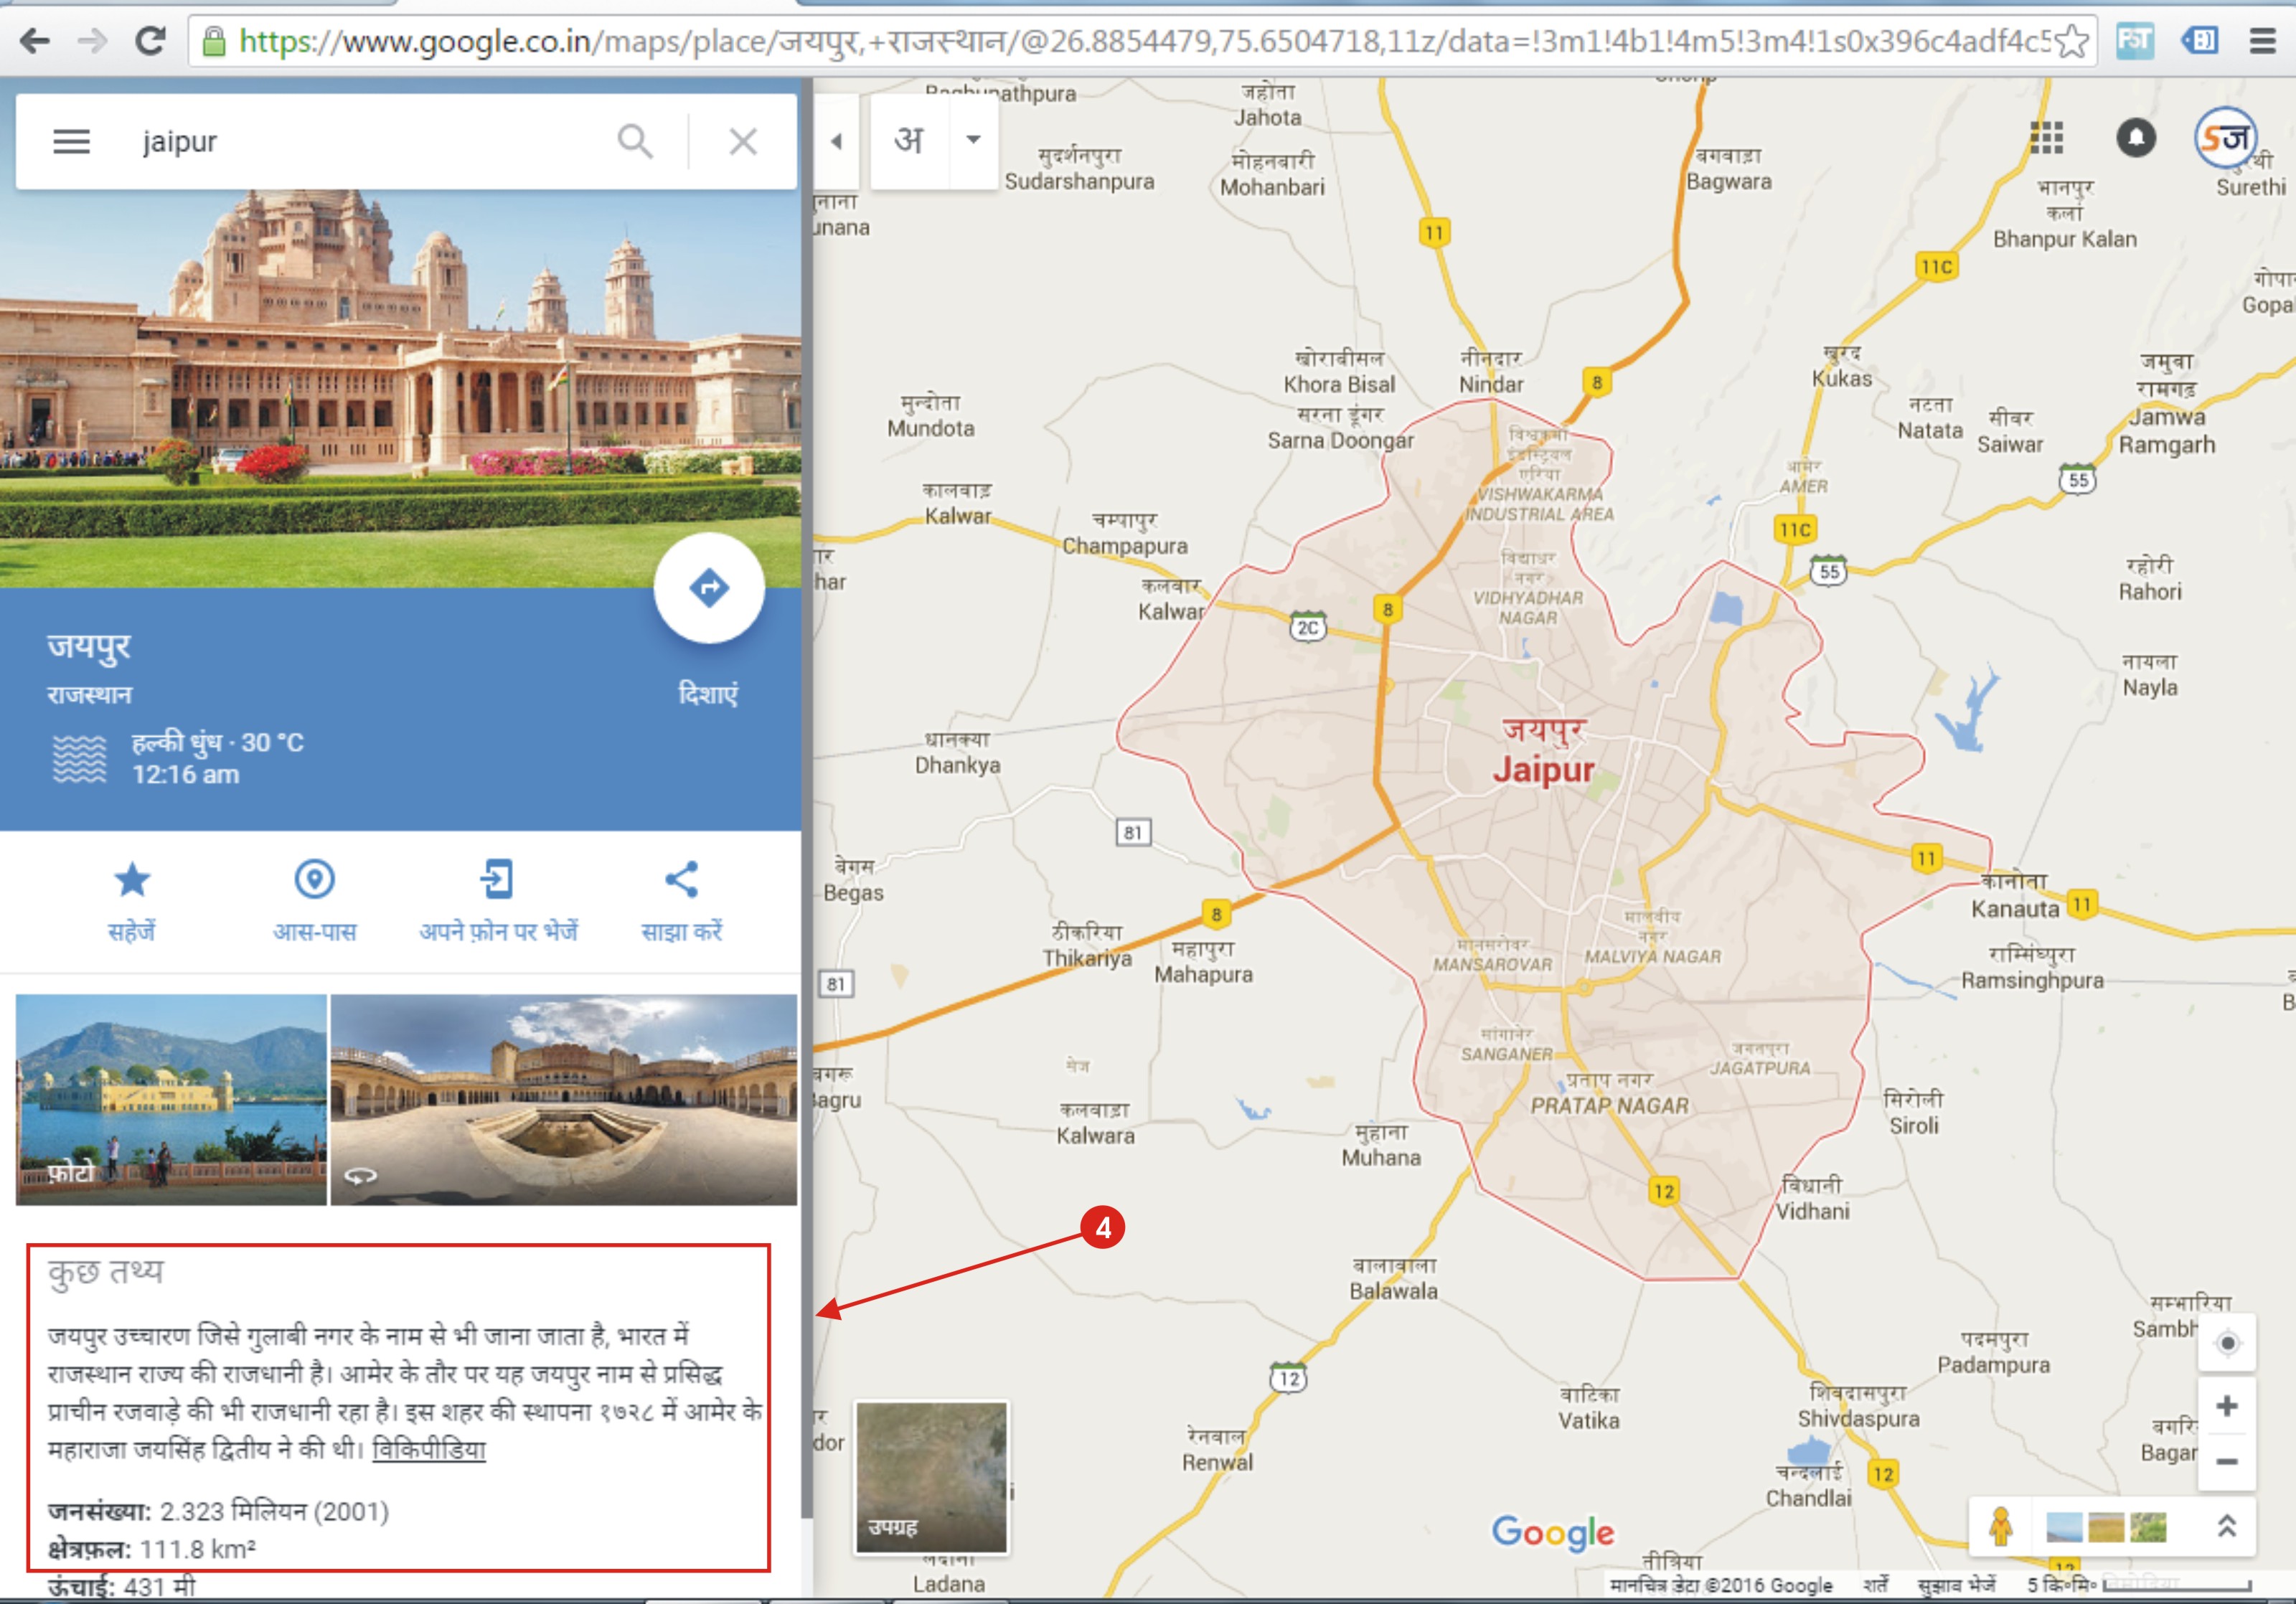 how to see google map in hindi